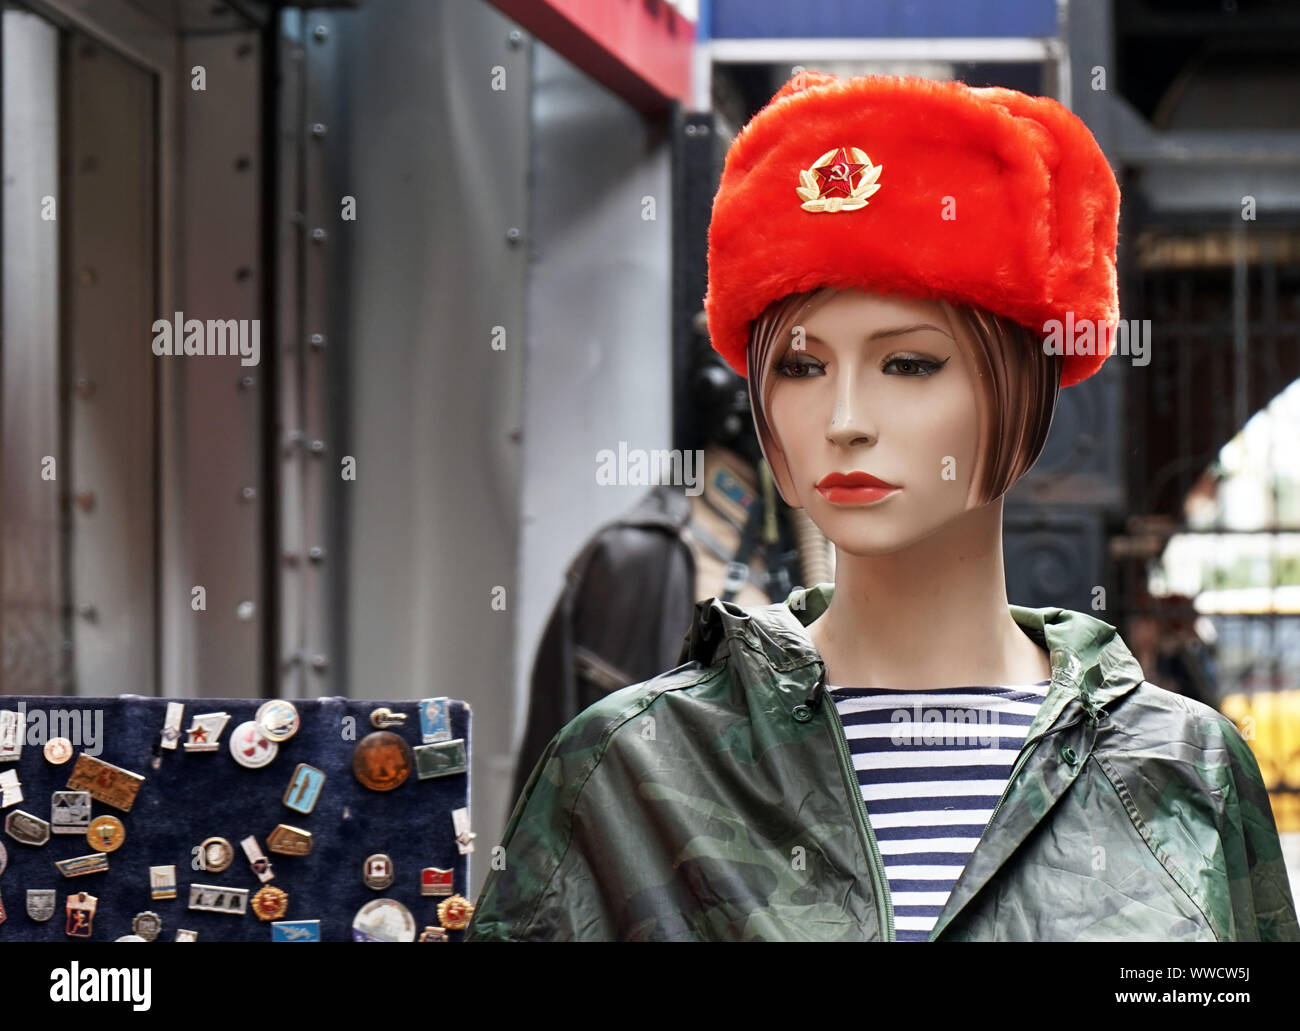 Female mannequin in a souvenir red Russian military cap. Stock Photo